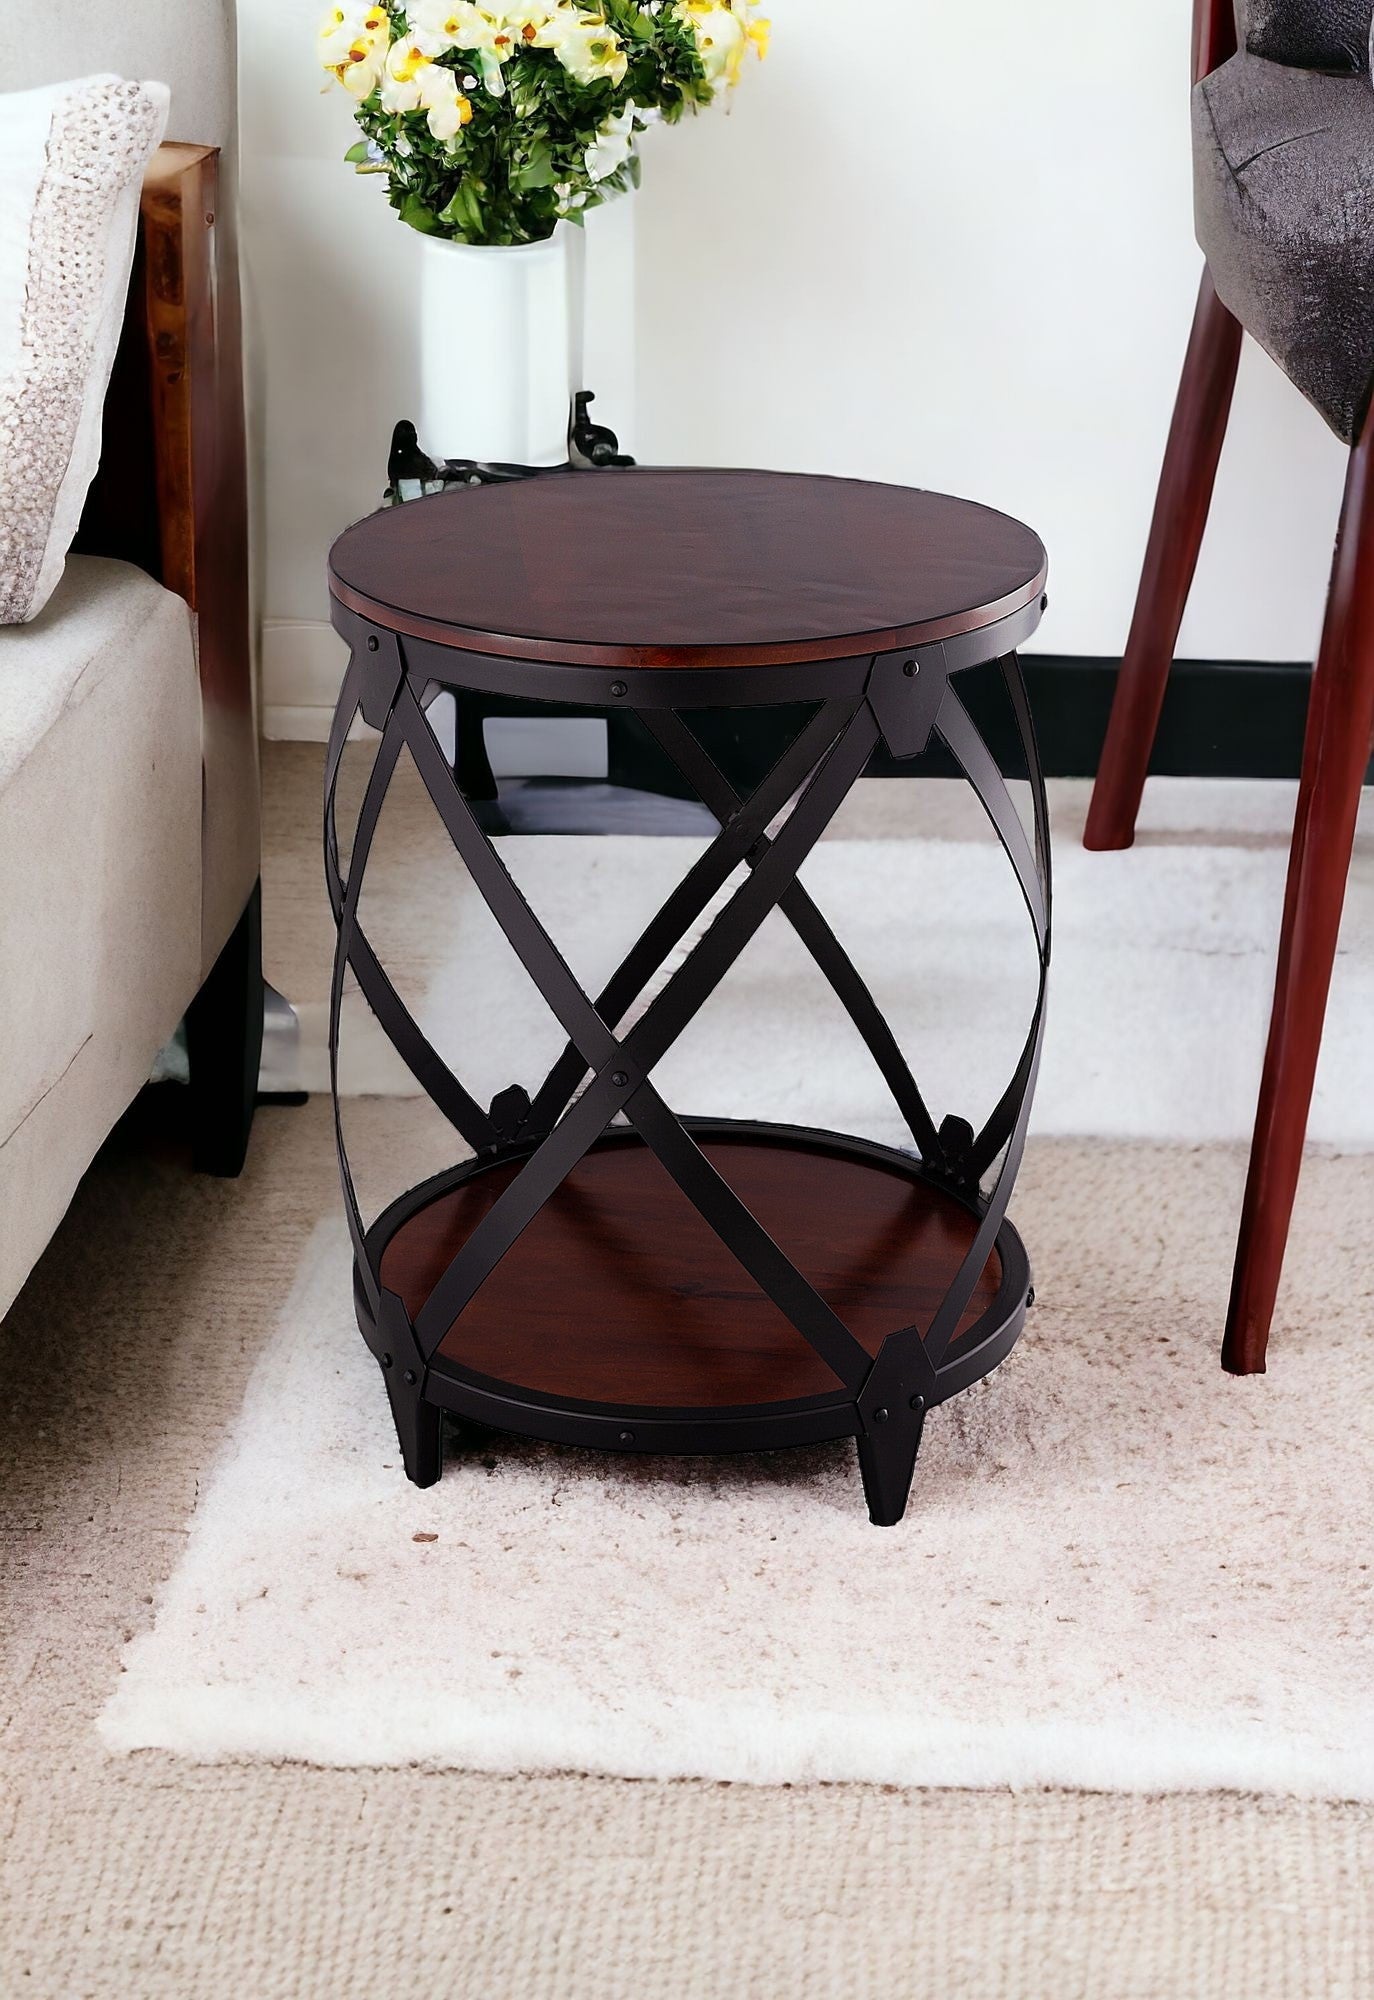 26" Black And Chestnut Solid Wood Round End Table